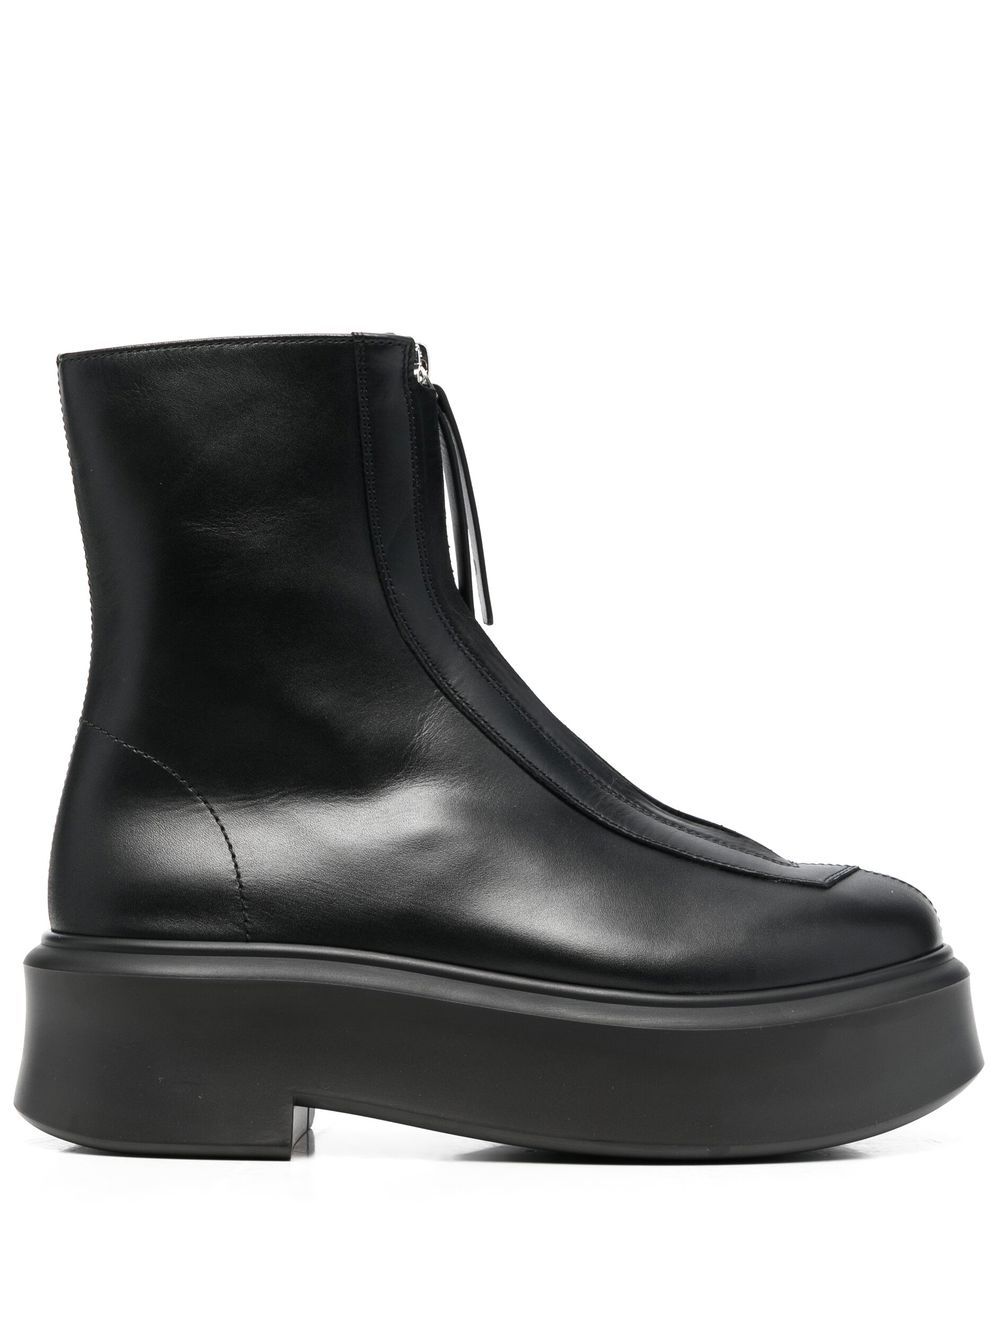 The Row Schuhe chunky leather boots - Black von The Row